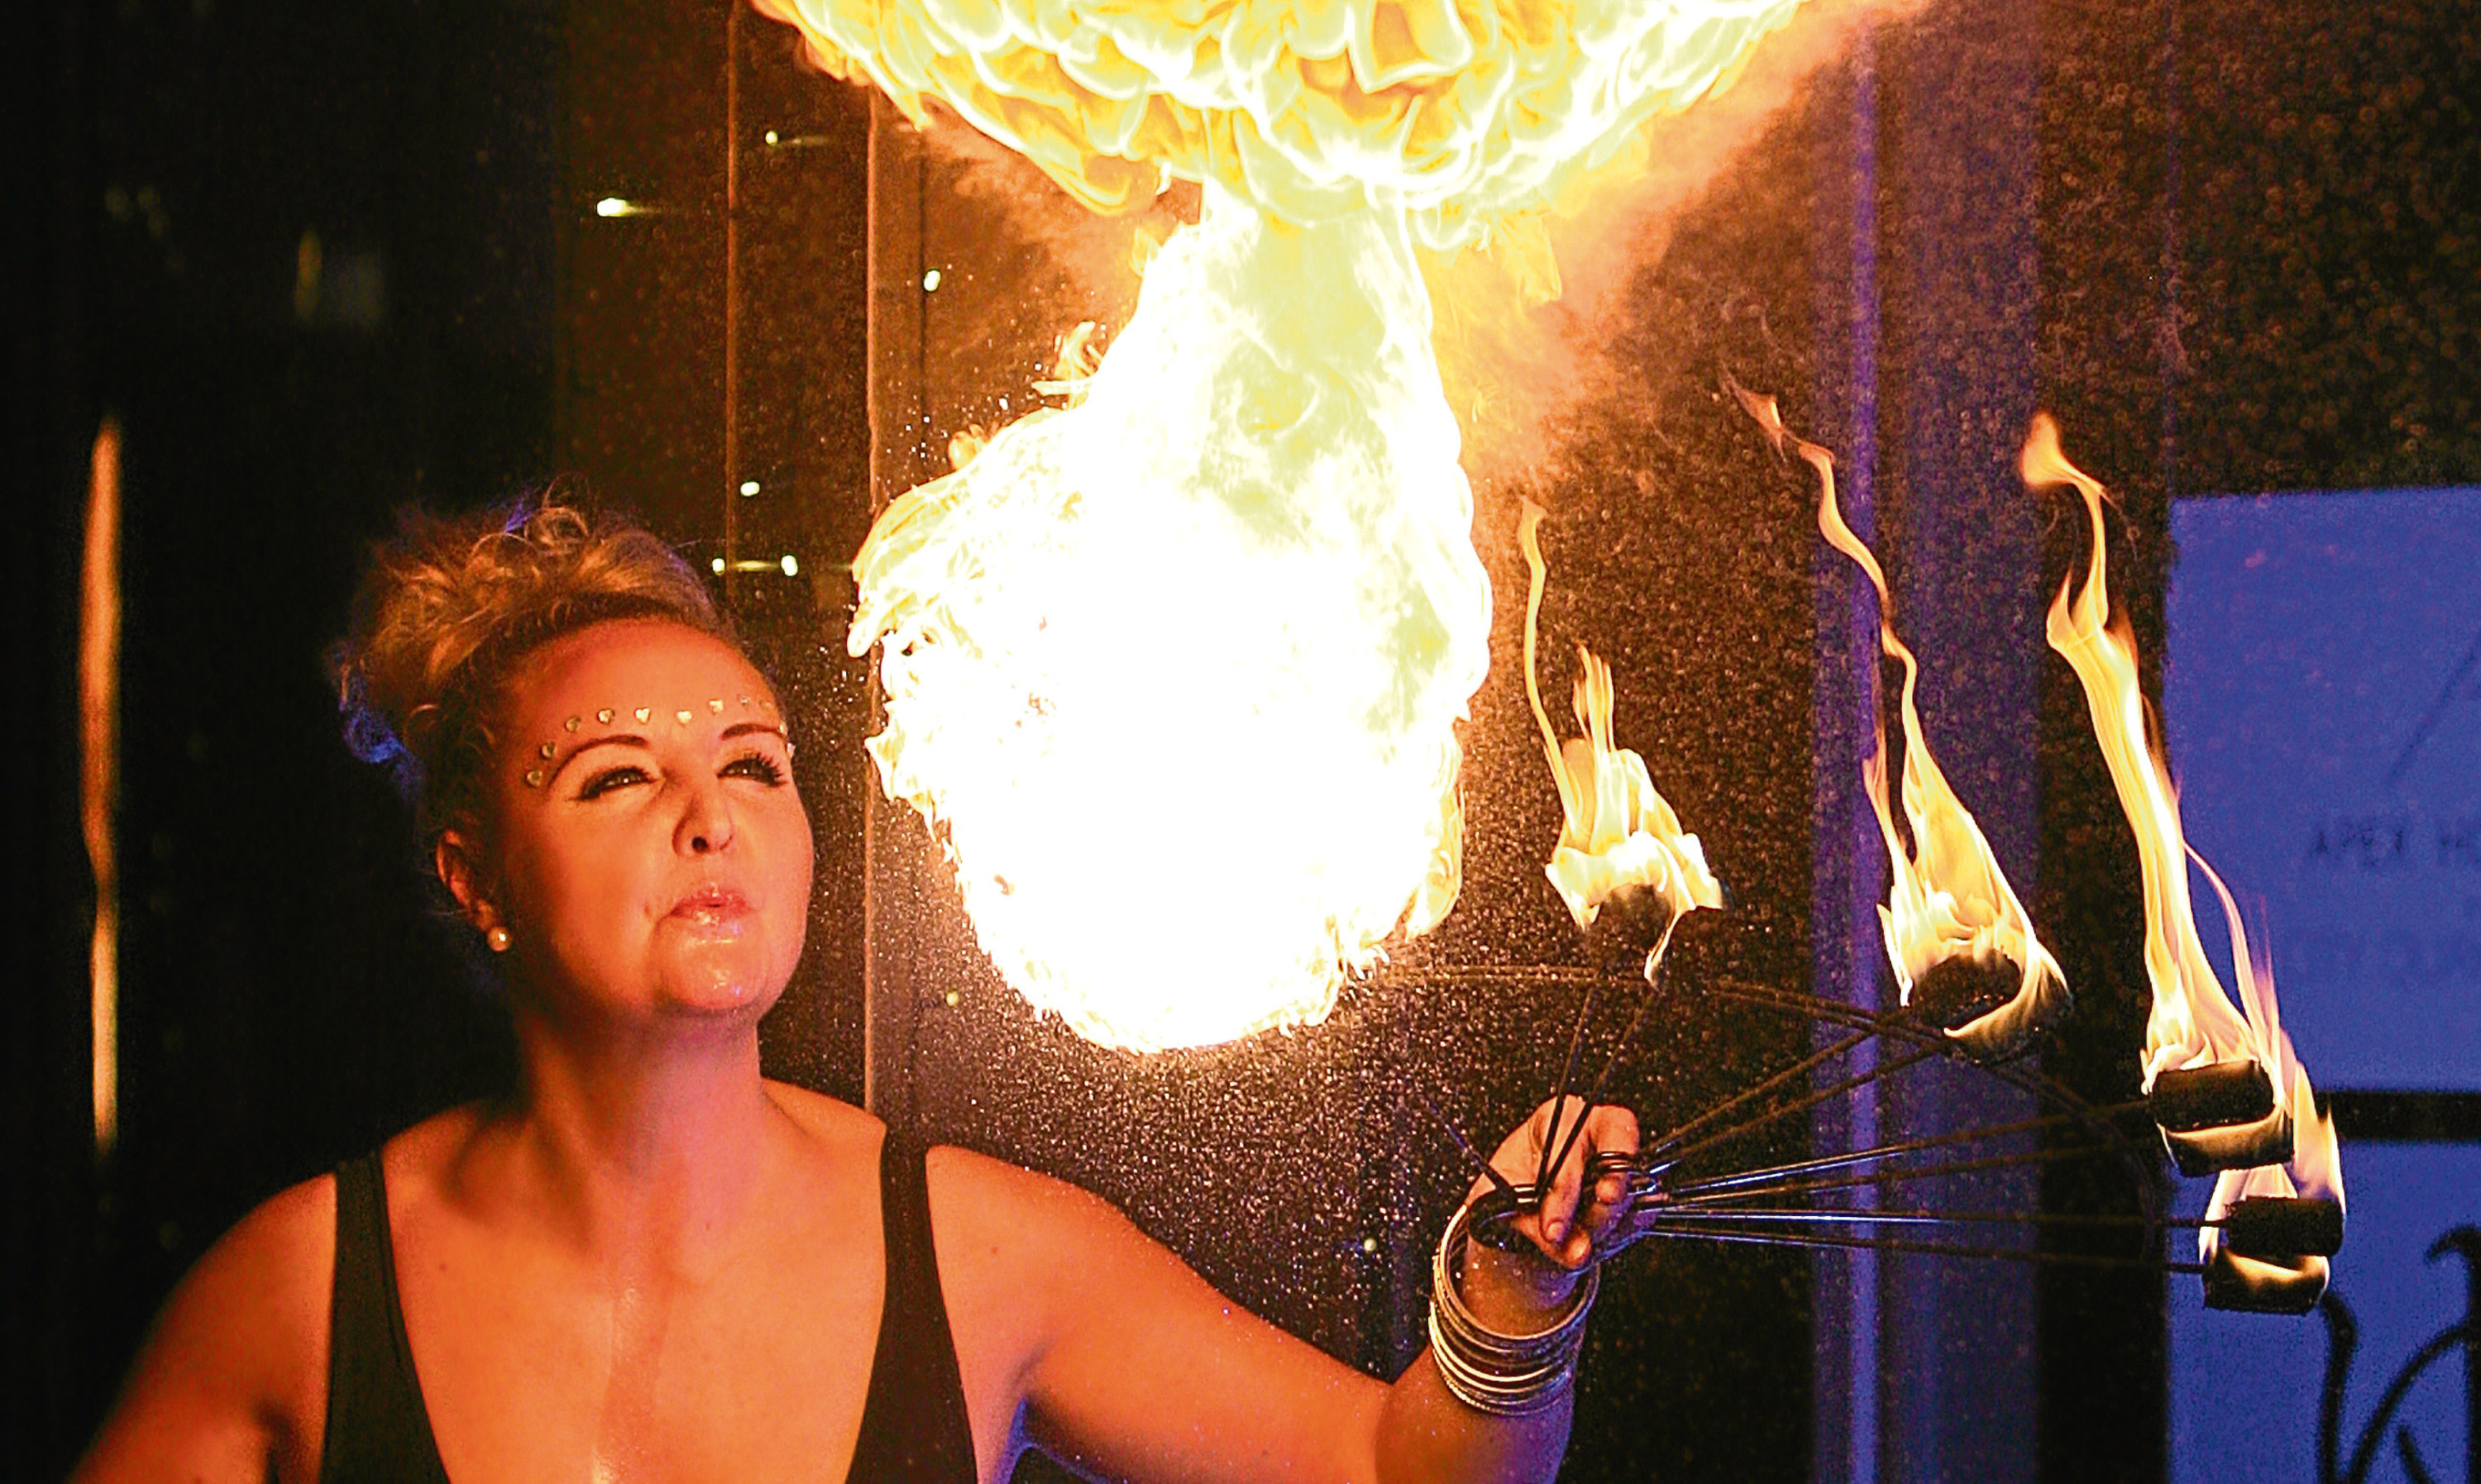 On fire: Business from across Tayside and Fife are turning up the heat on their competitors